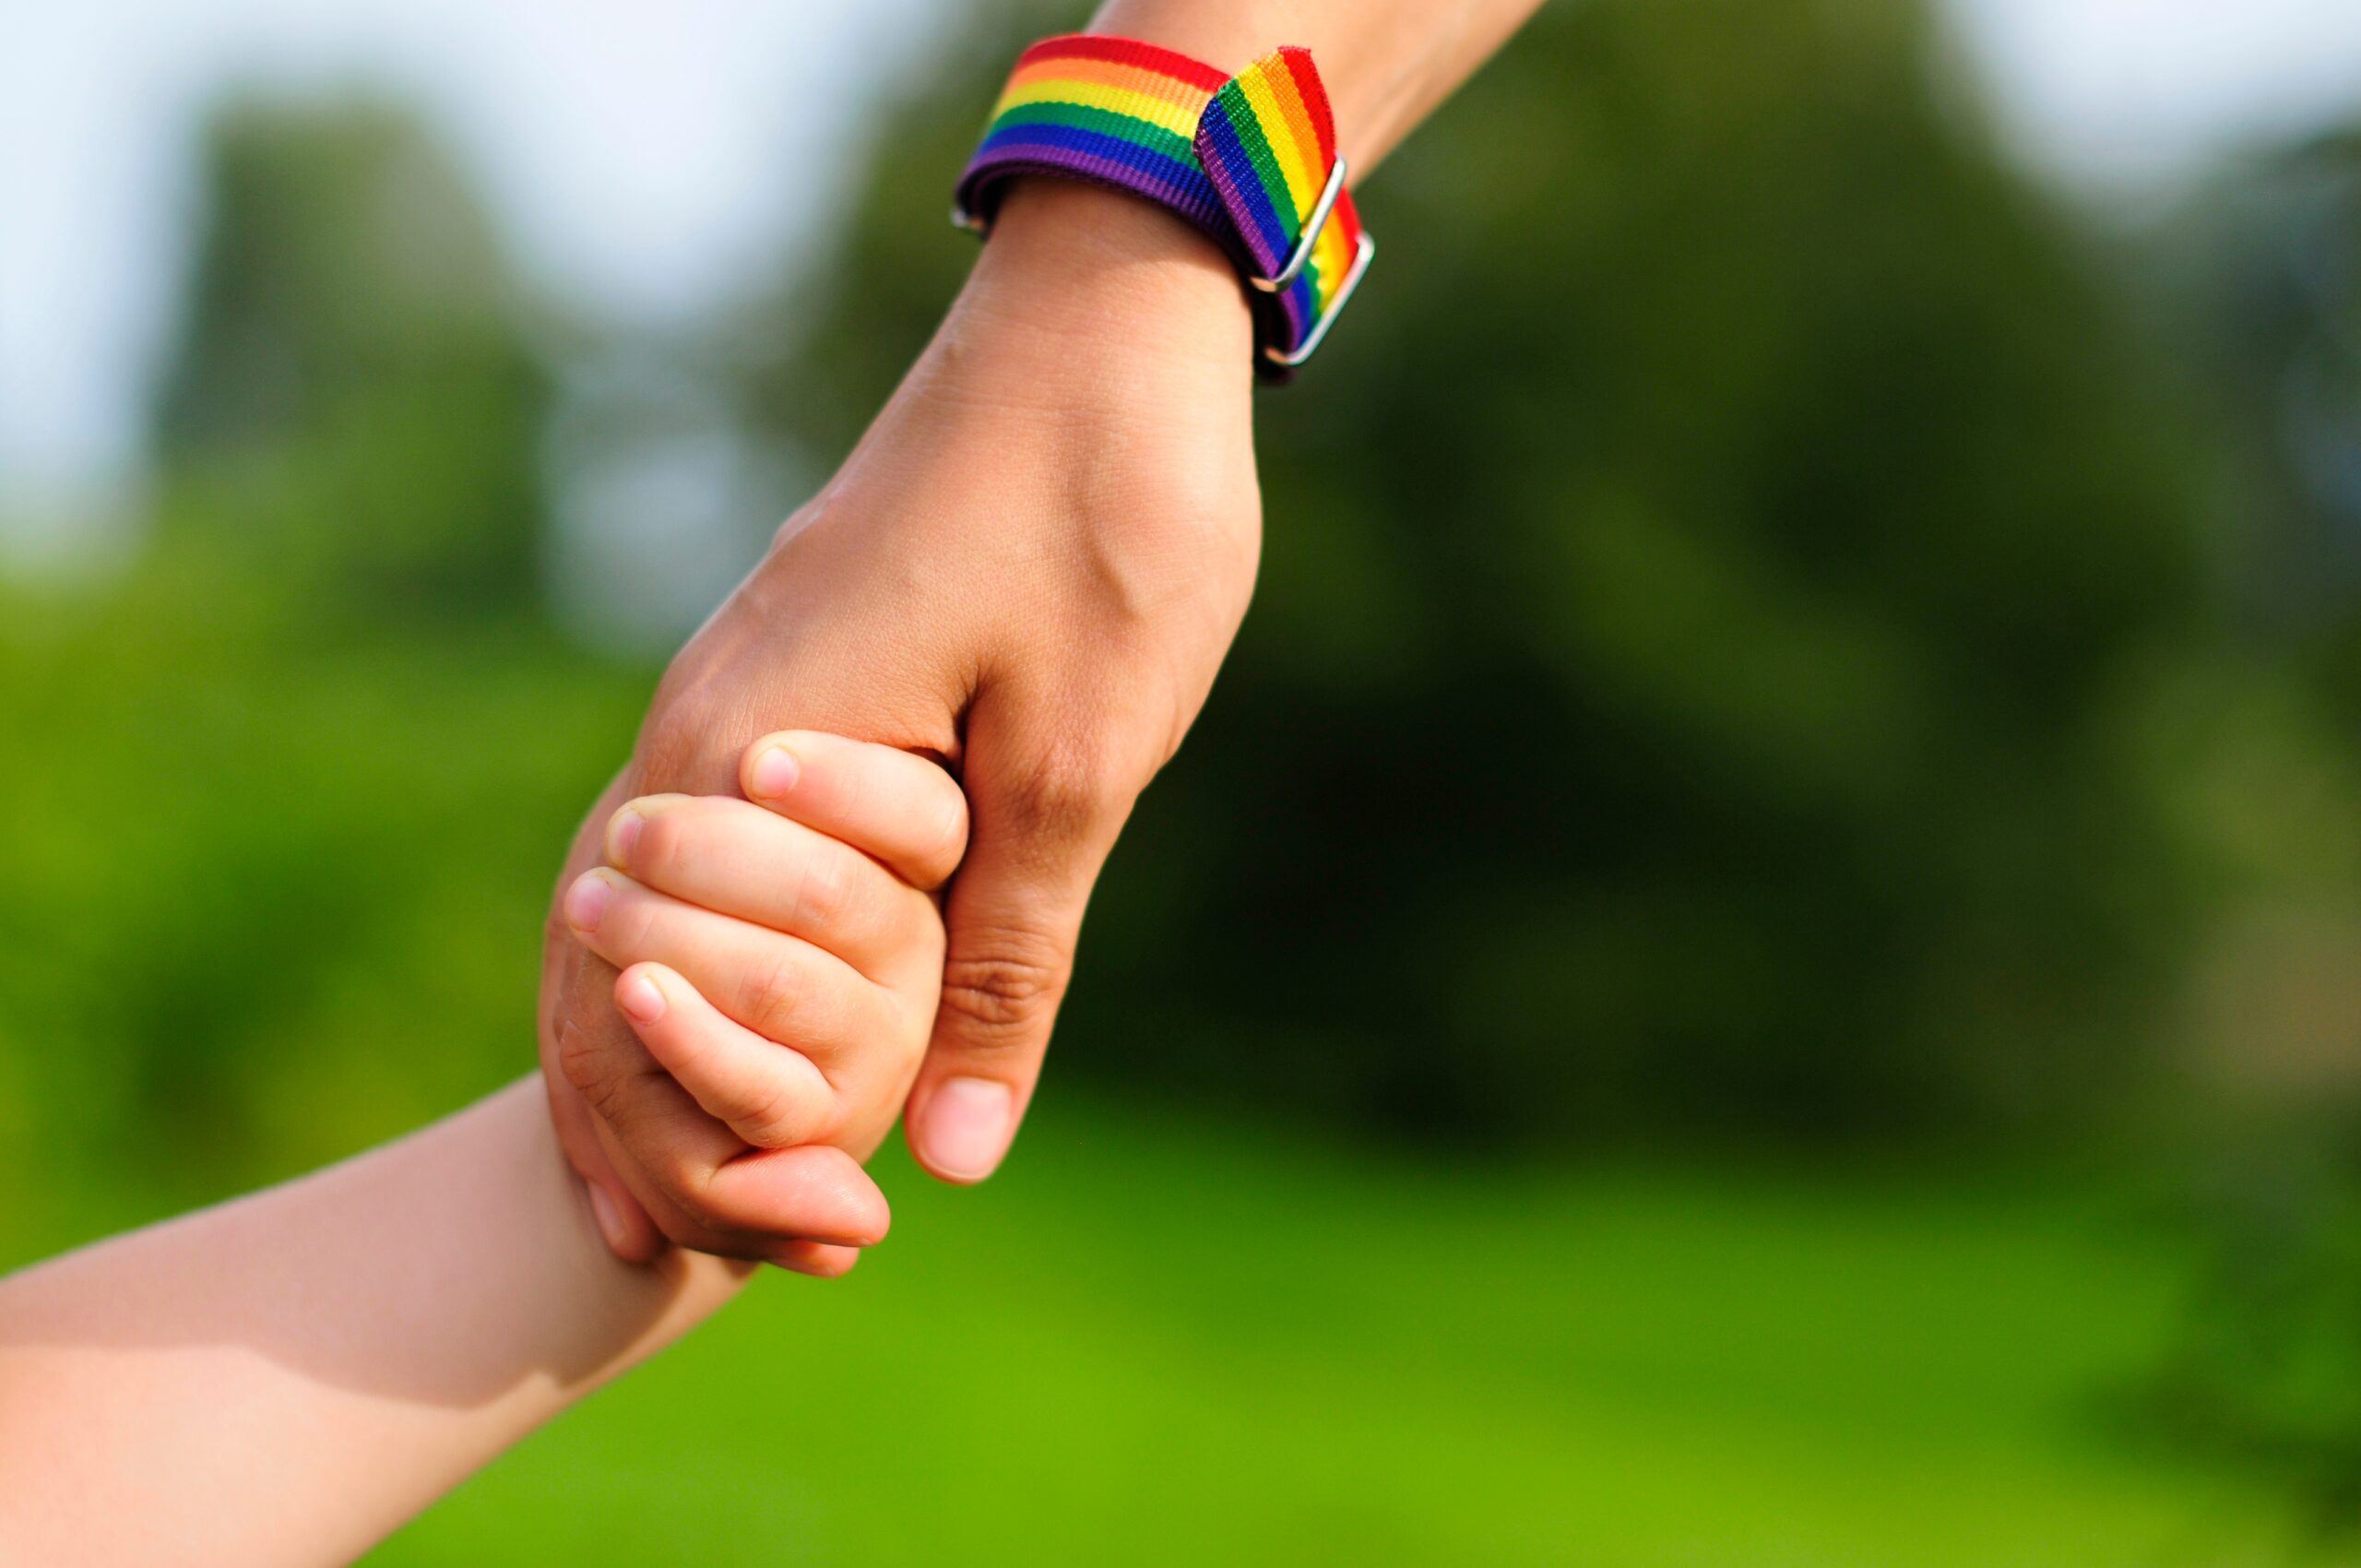 A adult hand holds the hand of a child, with the adult's hand wearing a rainnbow Pride bracelet.